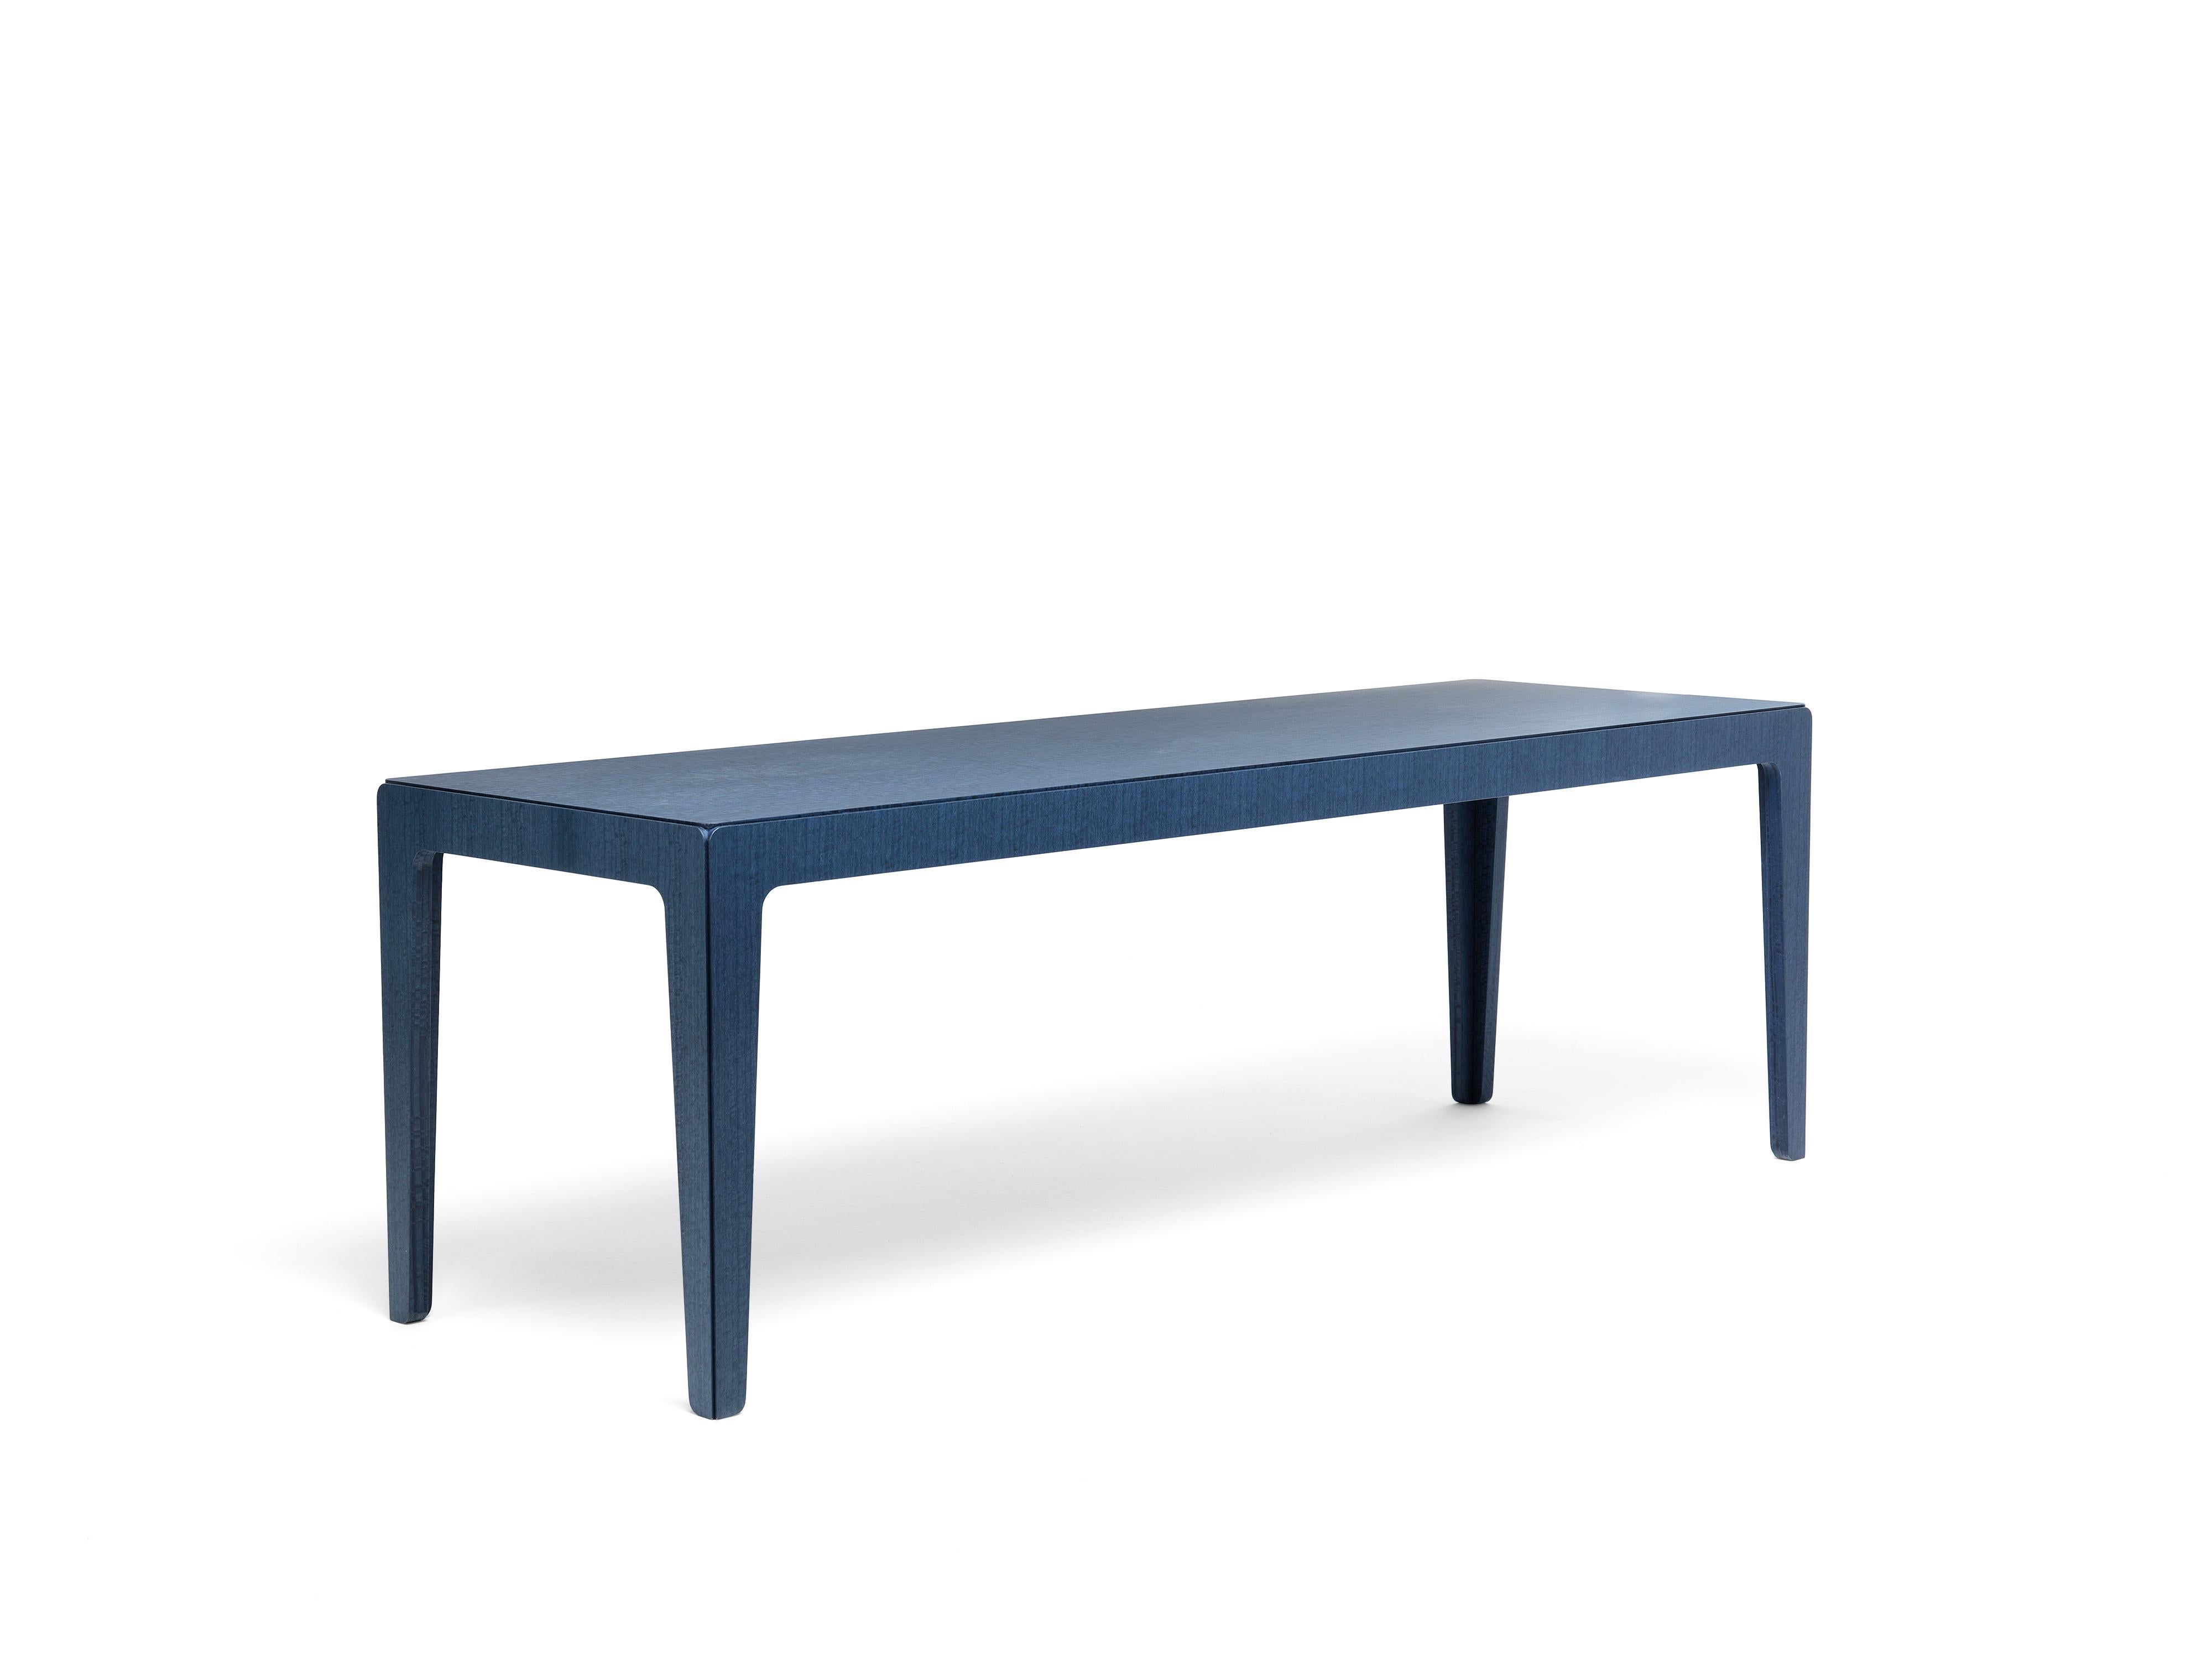 A family of 4-legged tables made of MDF covered with blue stained eucalyptus veneer. Through a simple trick the table, which is in fact the assembly of five parts, appears sculpted from a solid block. The four lateral elements, once they are